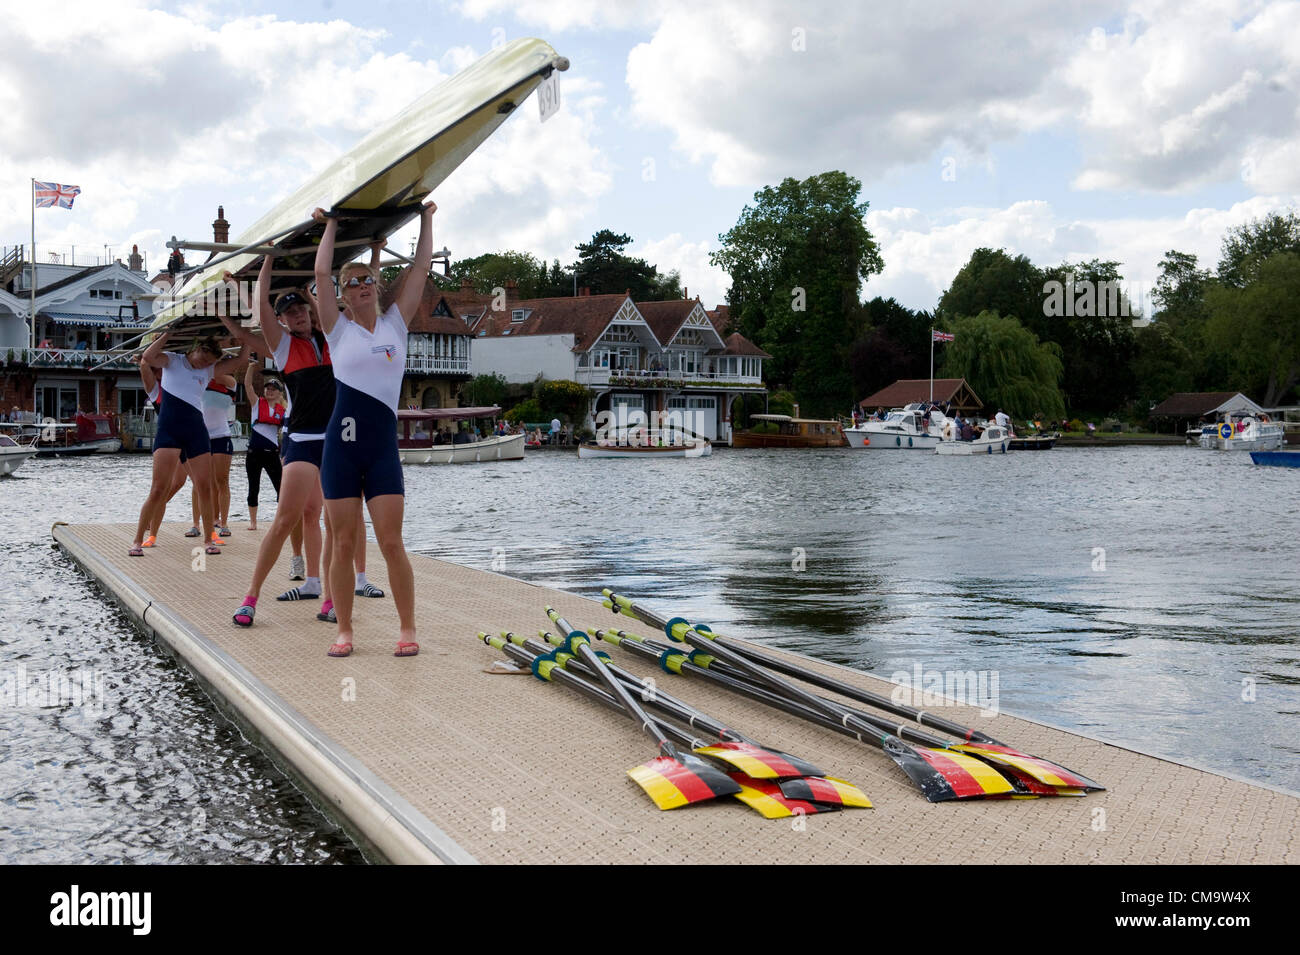 30.06.2012. Henley Upon Thames, England. The fourth day of the 2012 Henley Royal Regatta. Picture shows the team from Dortmund Rowing Centre, Germany. Stock Photo